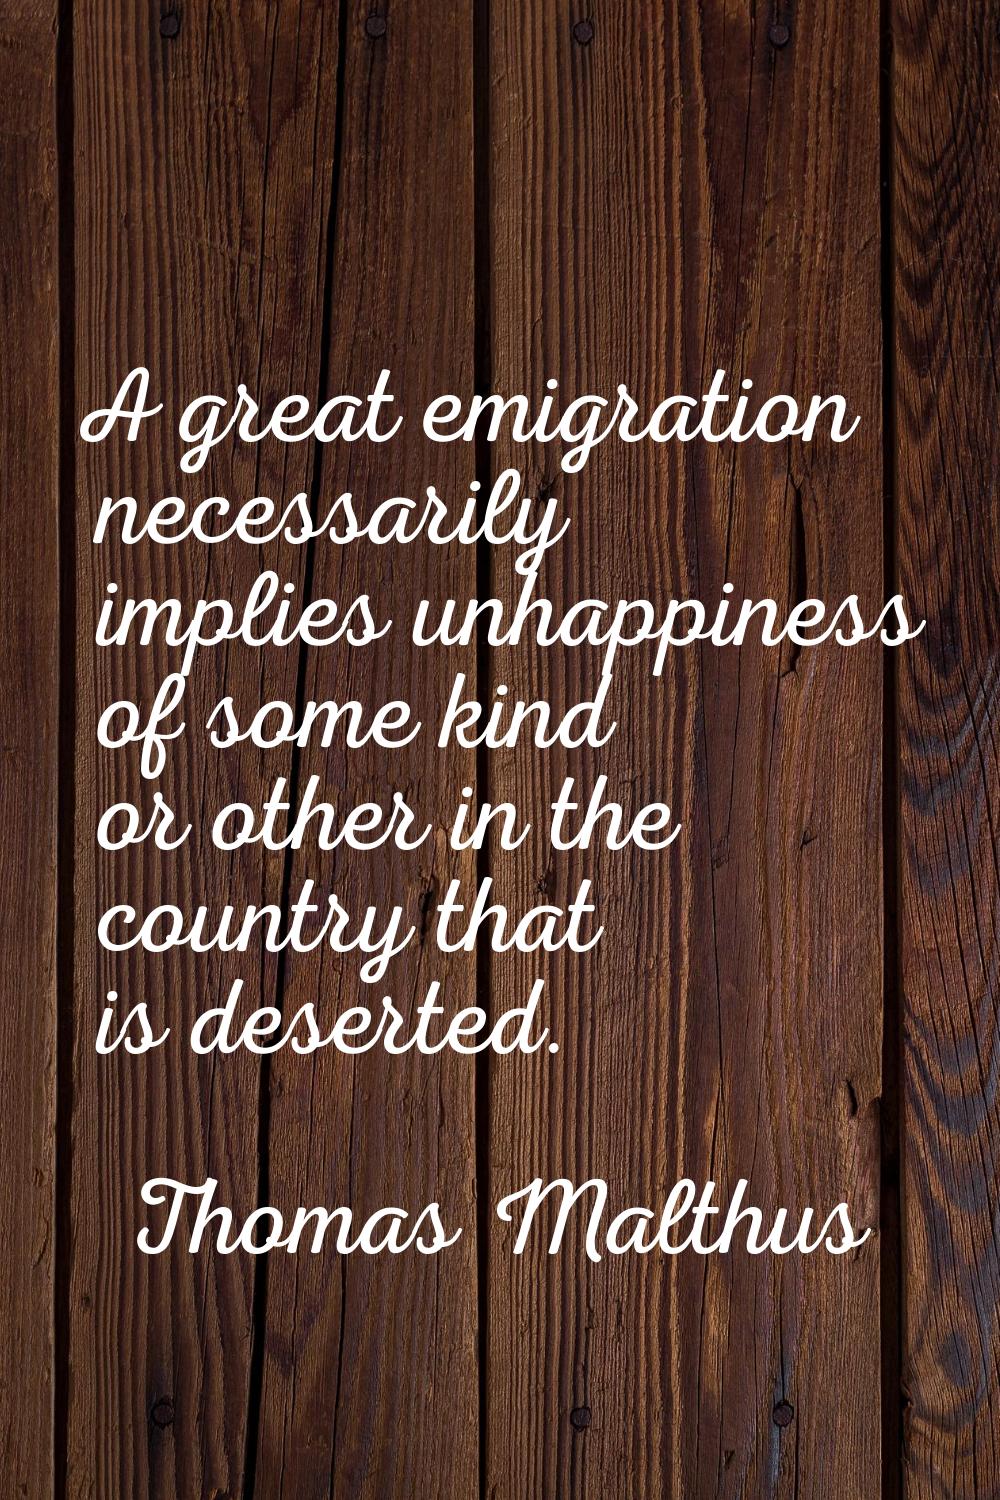 A great emigration necessarily implies unhappiness of some kind or other in the country that is des